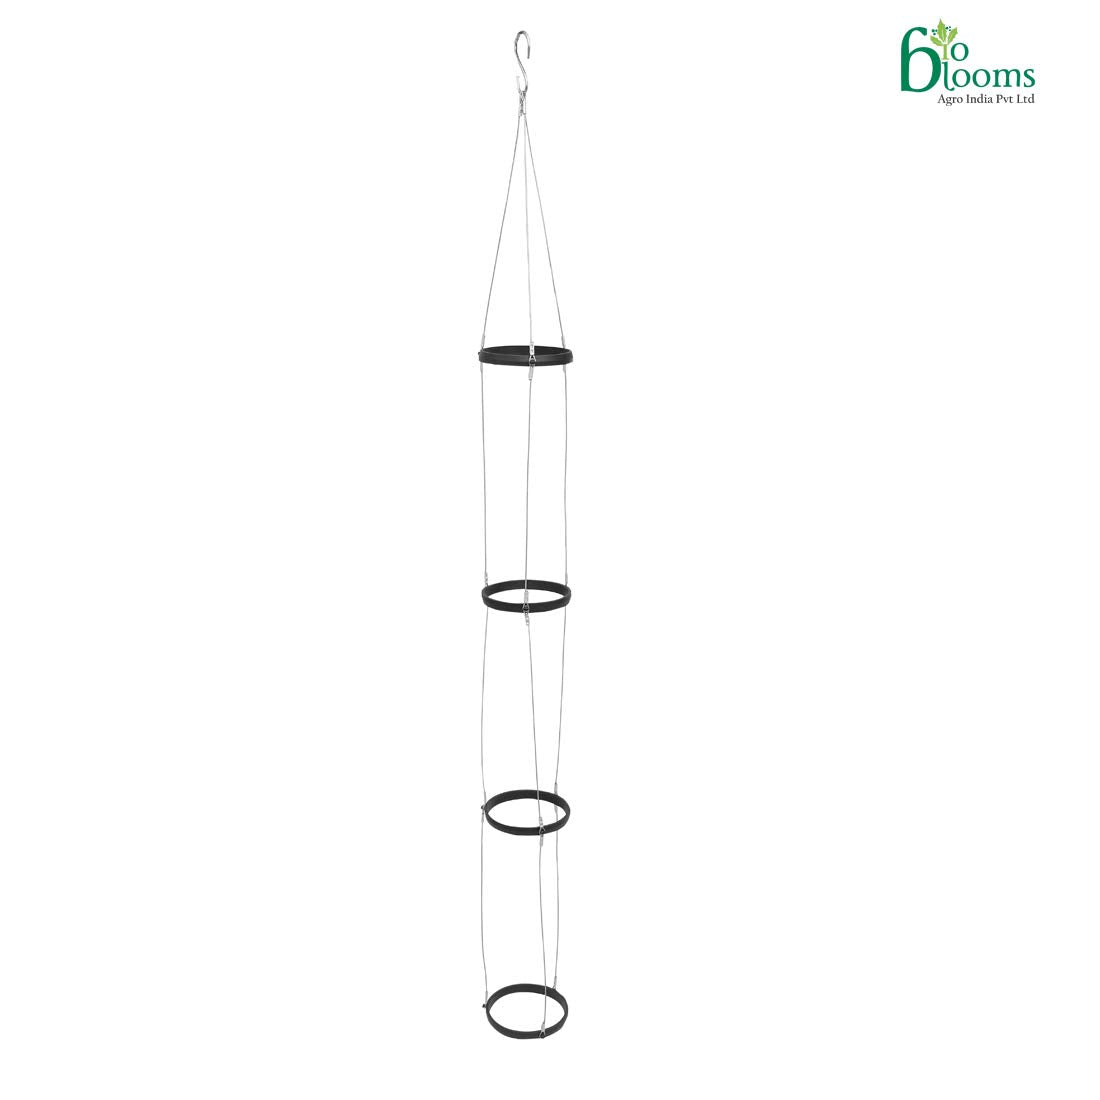 Self Watering Hanging Pot with coverd Metal Chains and self Watering Insert 4 pots in 1 Hanger Set